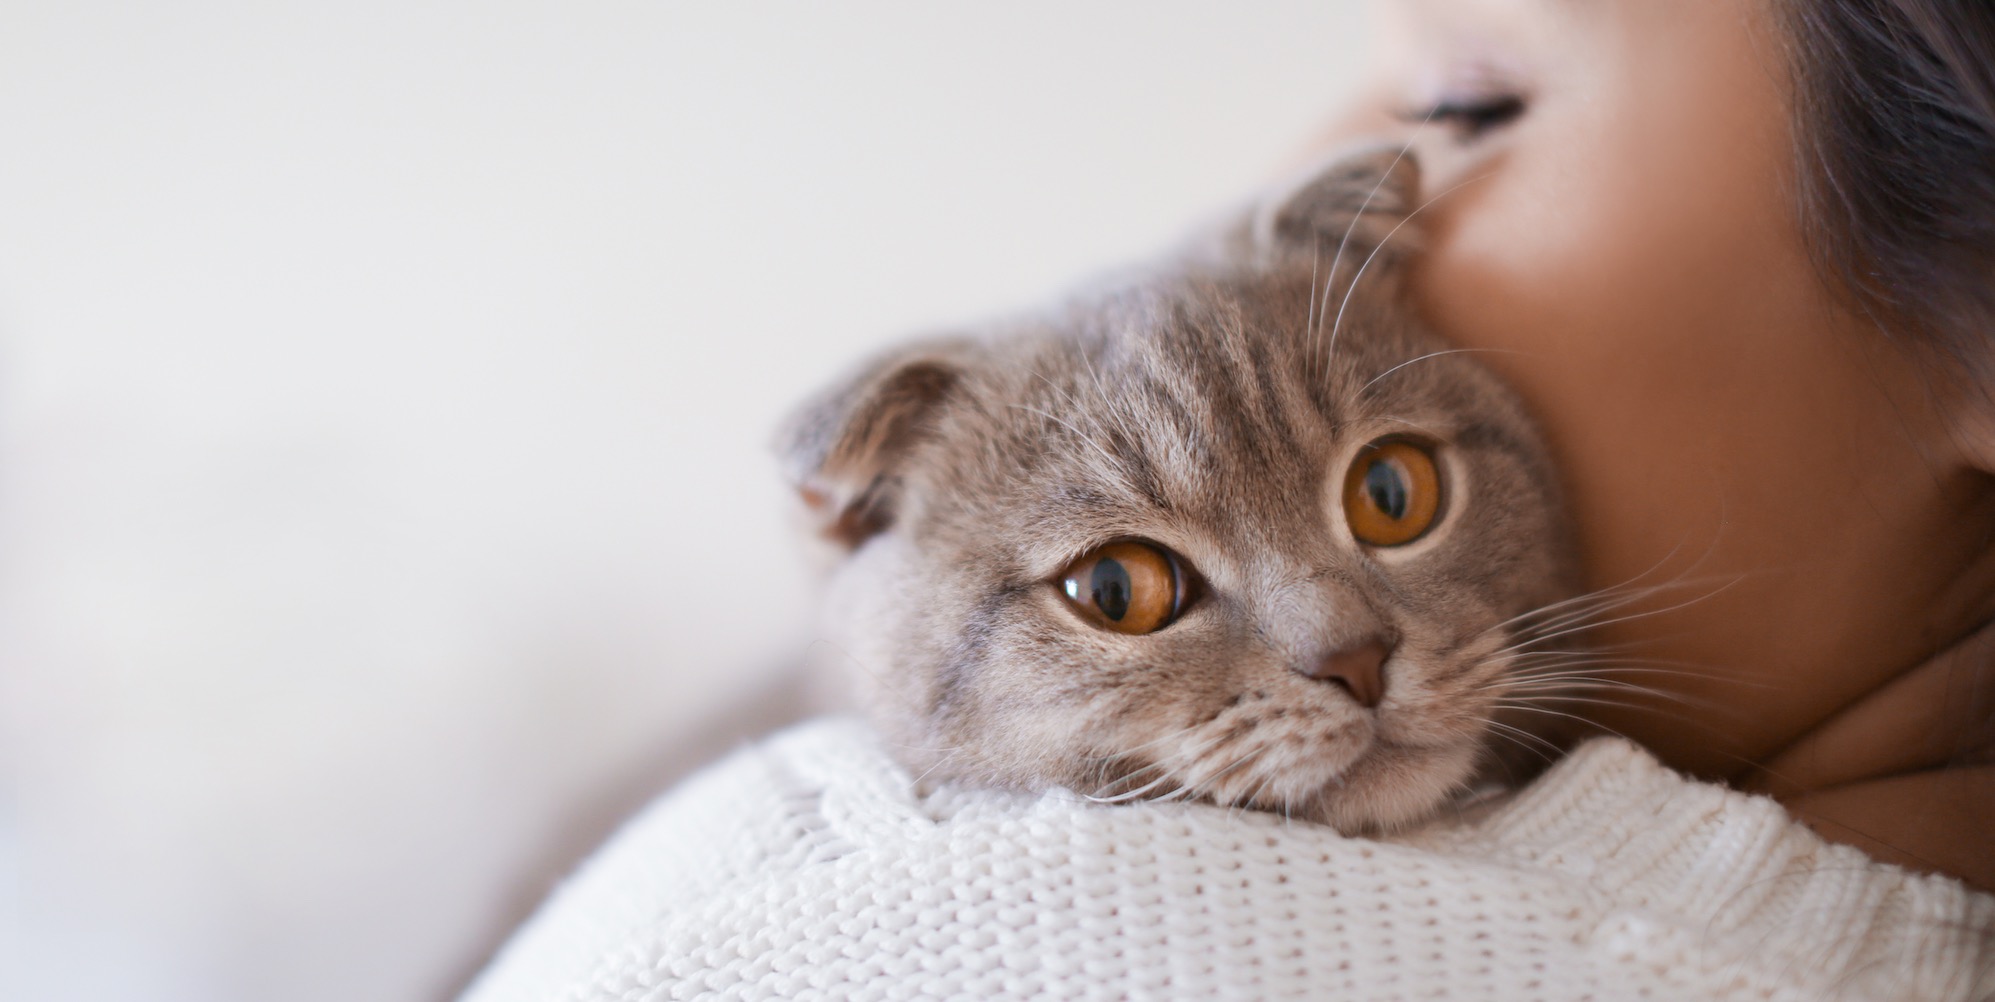 All You Need To Know About Your Cat Going Into Labor